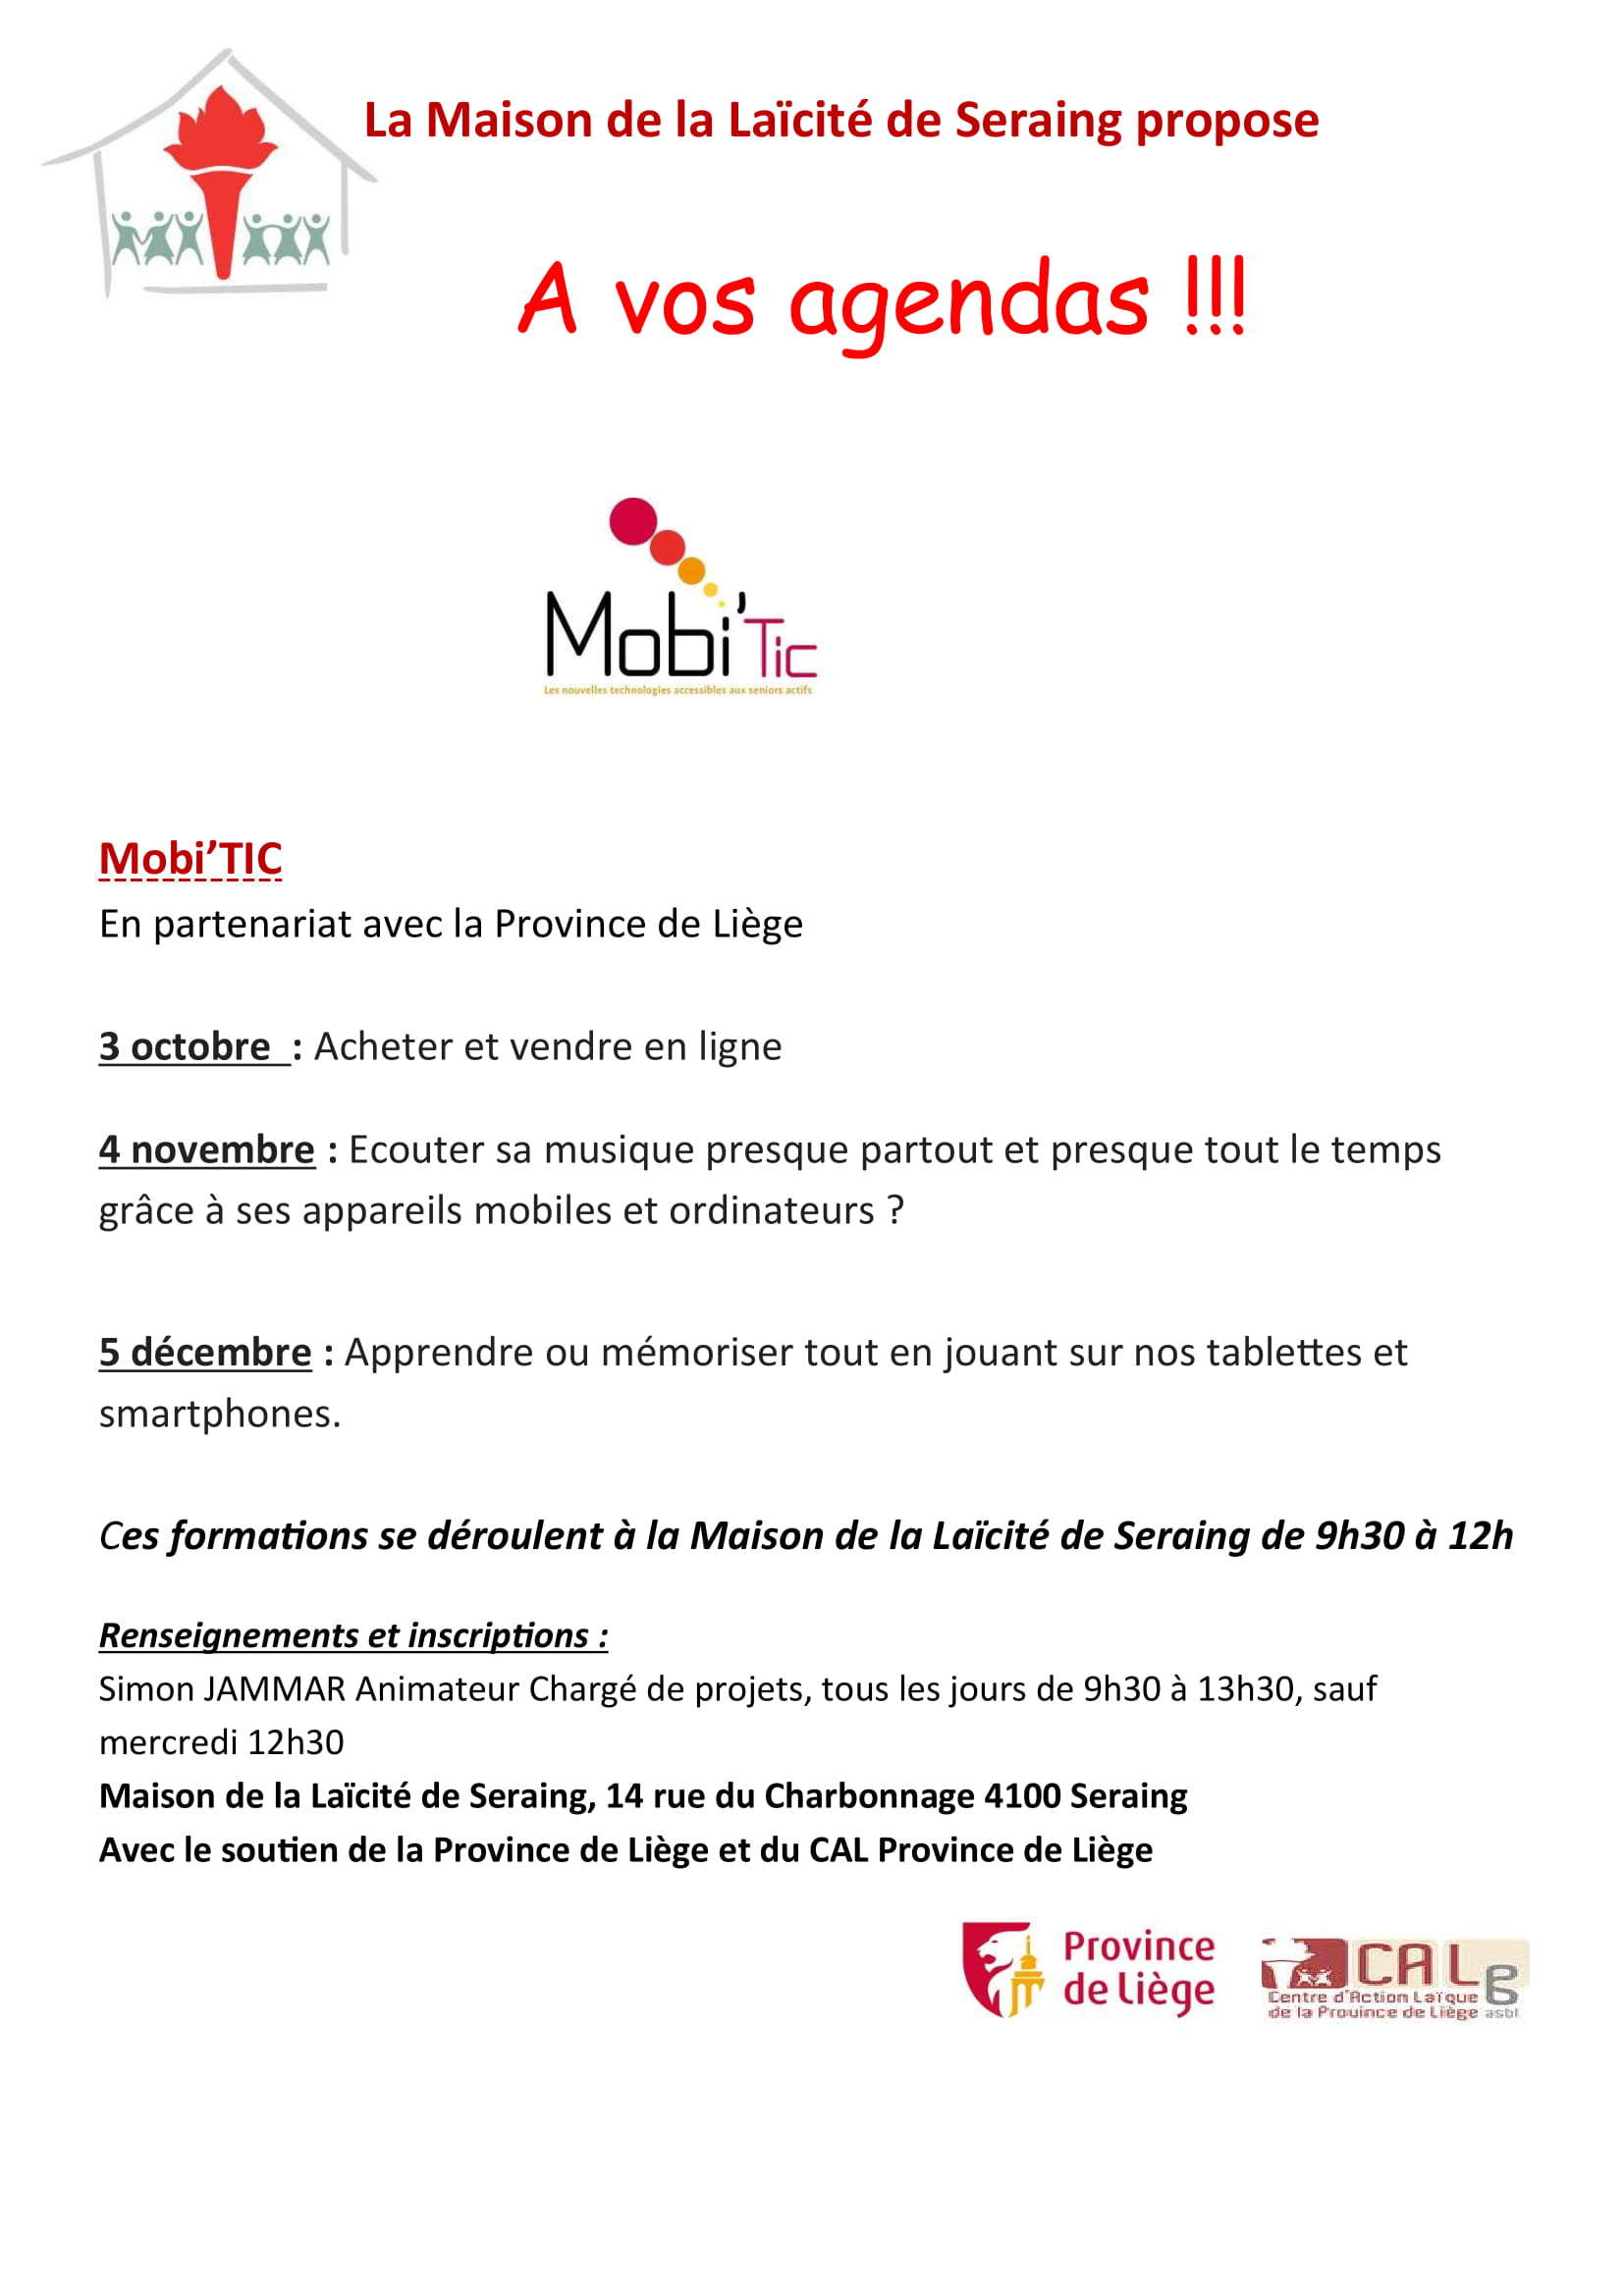 Info Mobotic septembre 2019 1